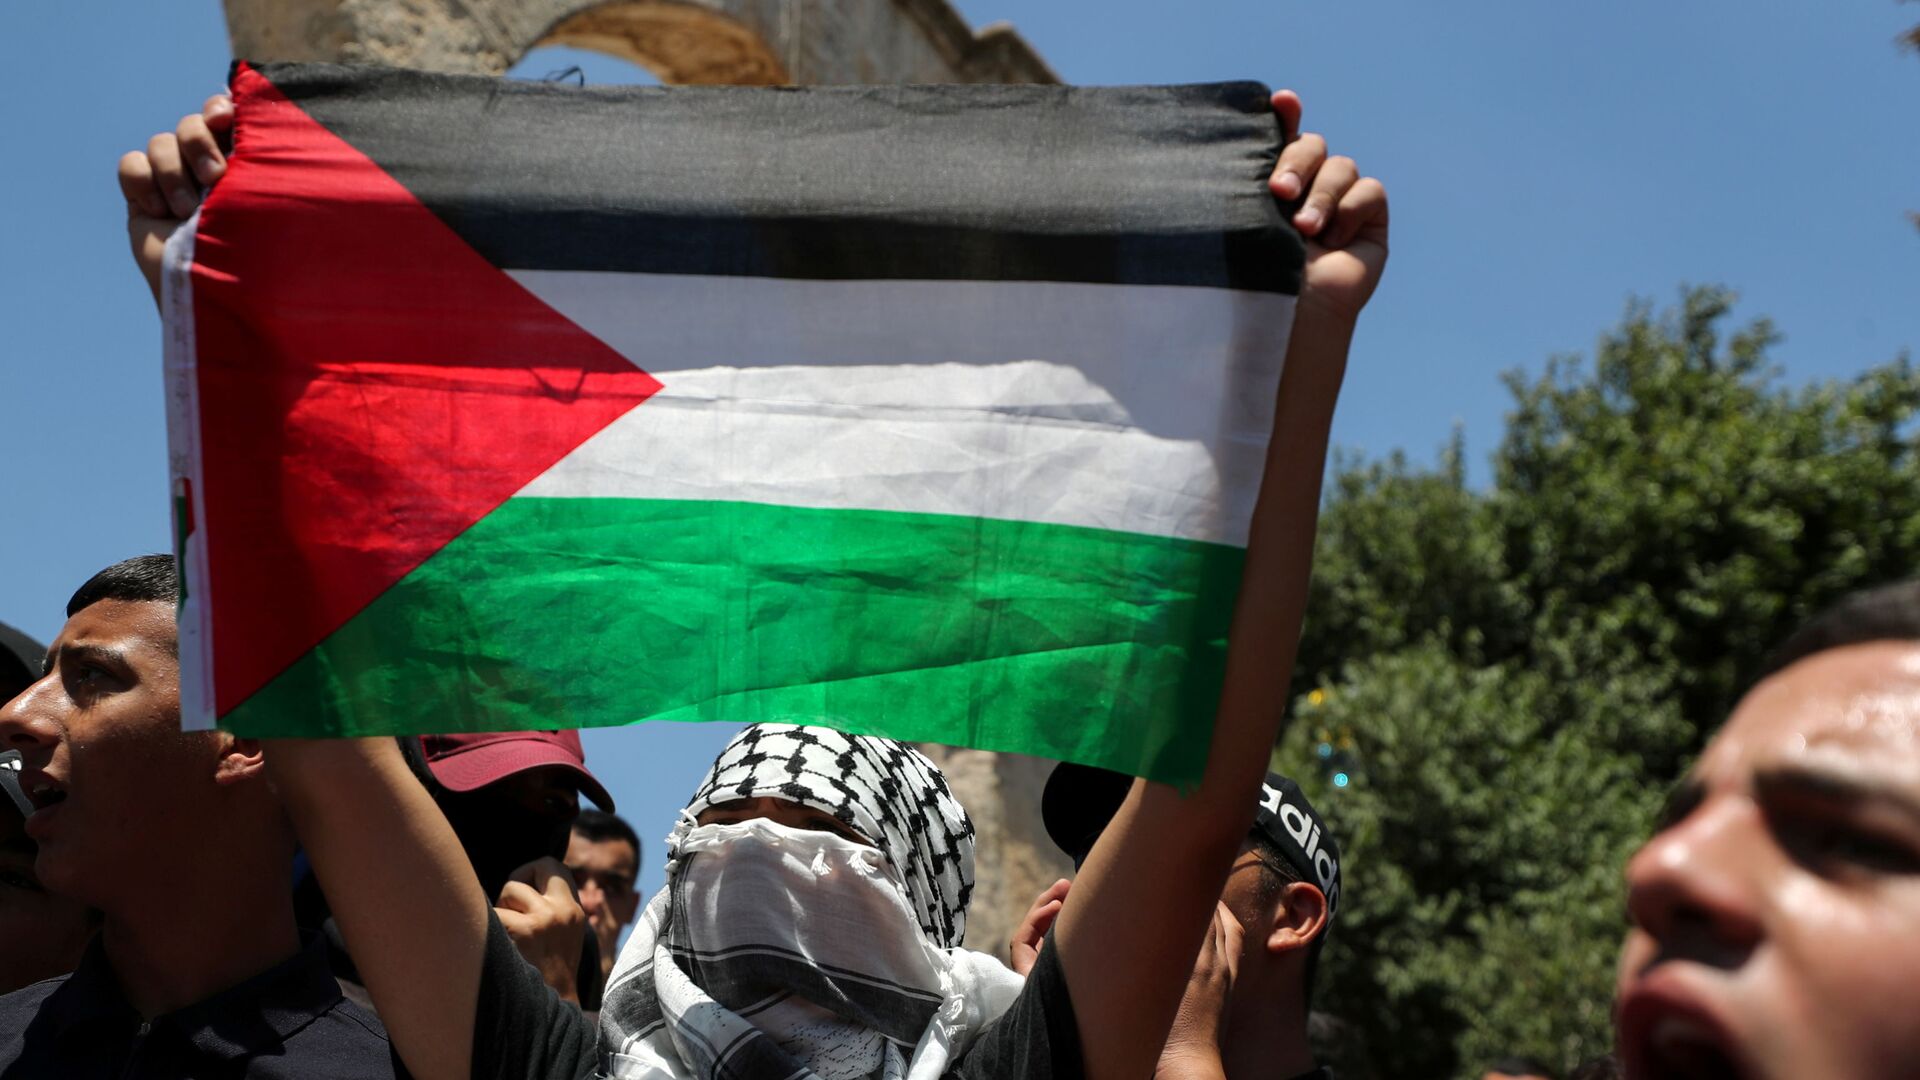 A demonstrator holds a Palestinian flag during a protest over the death of Nizar Banat, at the compound that houses Al-Aqsa Mosque, known to Muslims as Noble Sanctuary and to Jews as Temple Mount, in Jerusalem's Old City, June 25, 2021. - Sputnik International, 1920, 27.06.2021